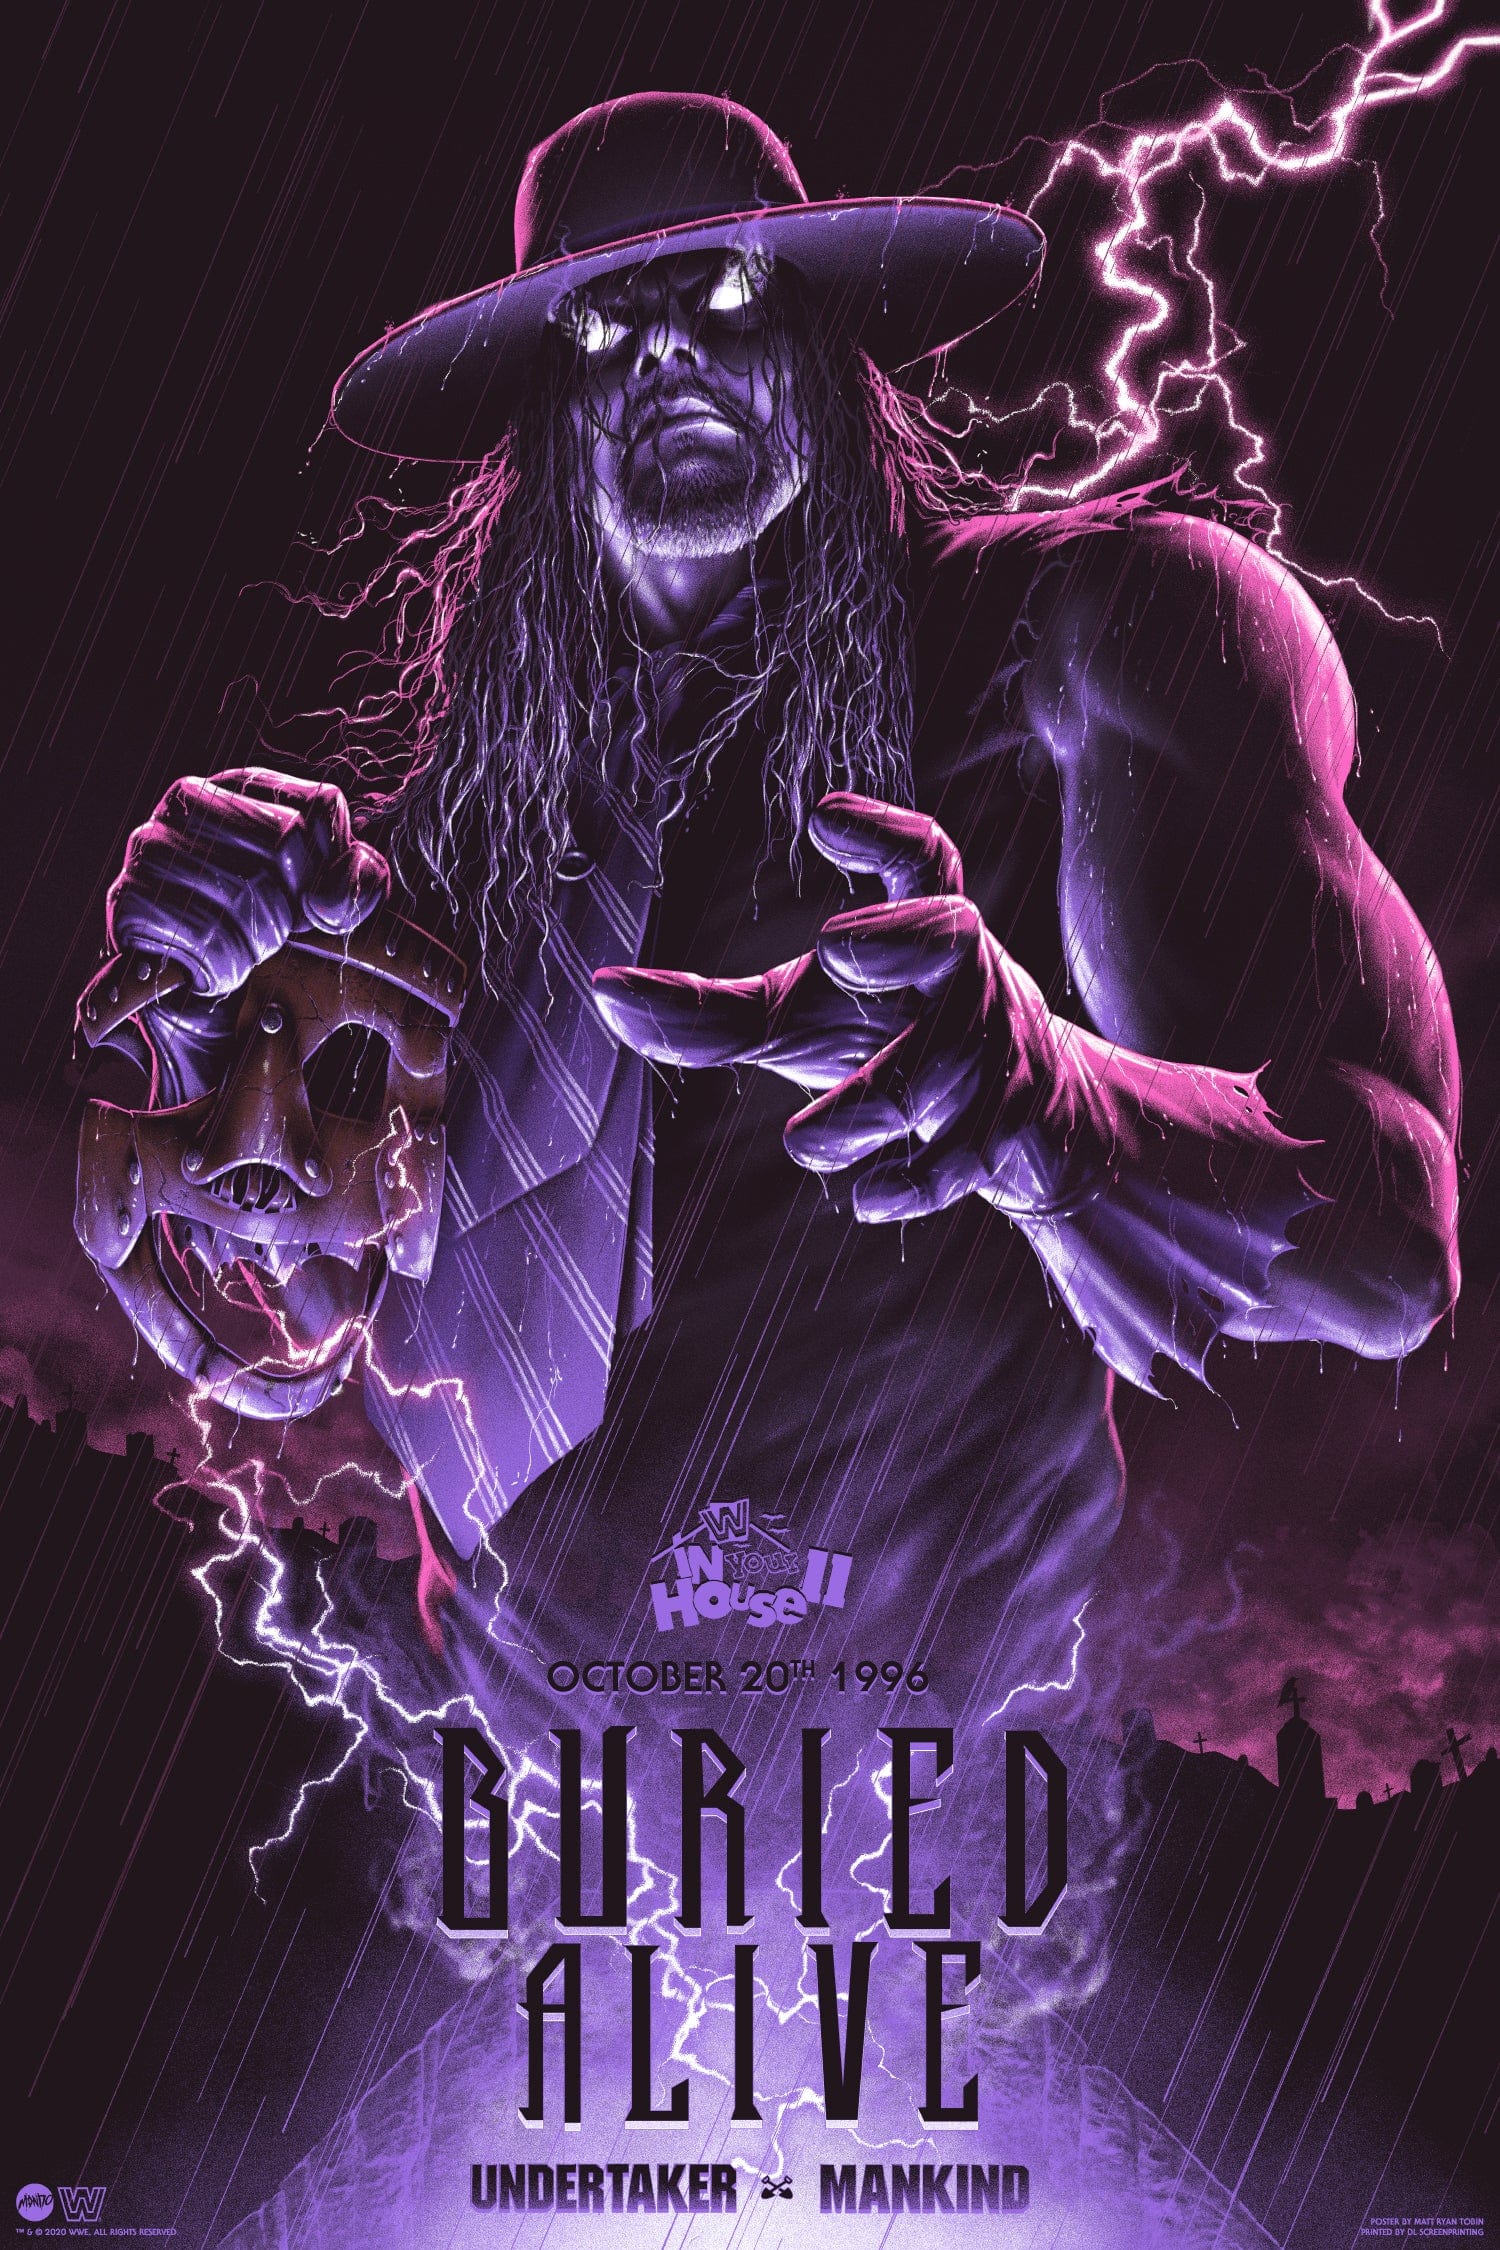 100+] The Undertaker Wallpapers